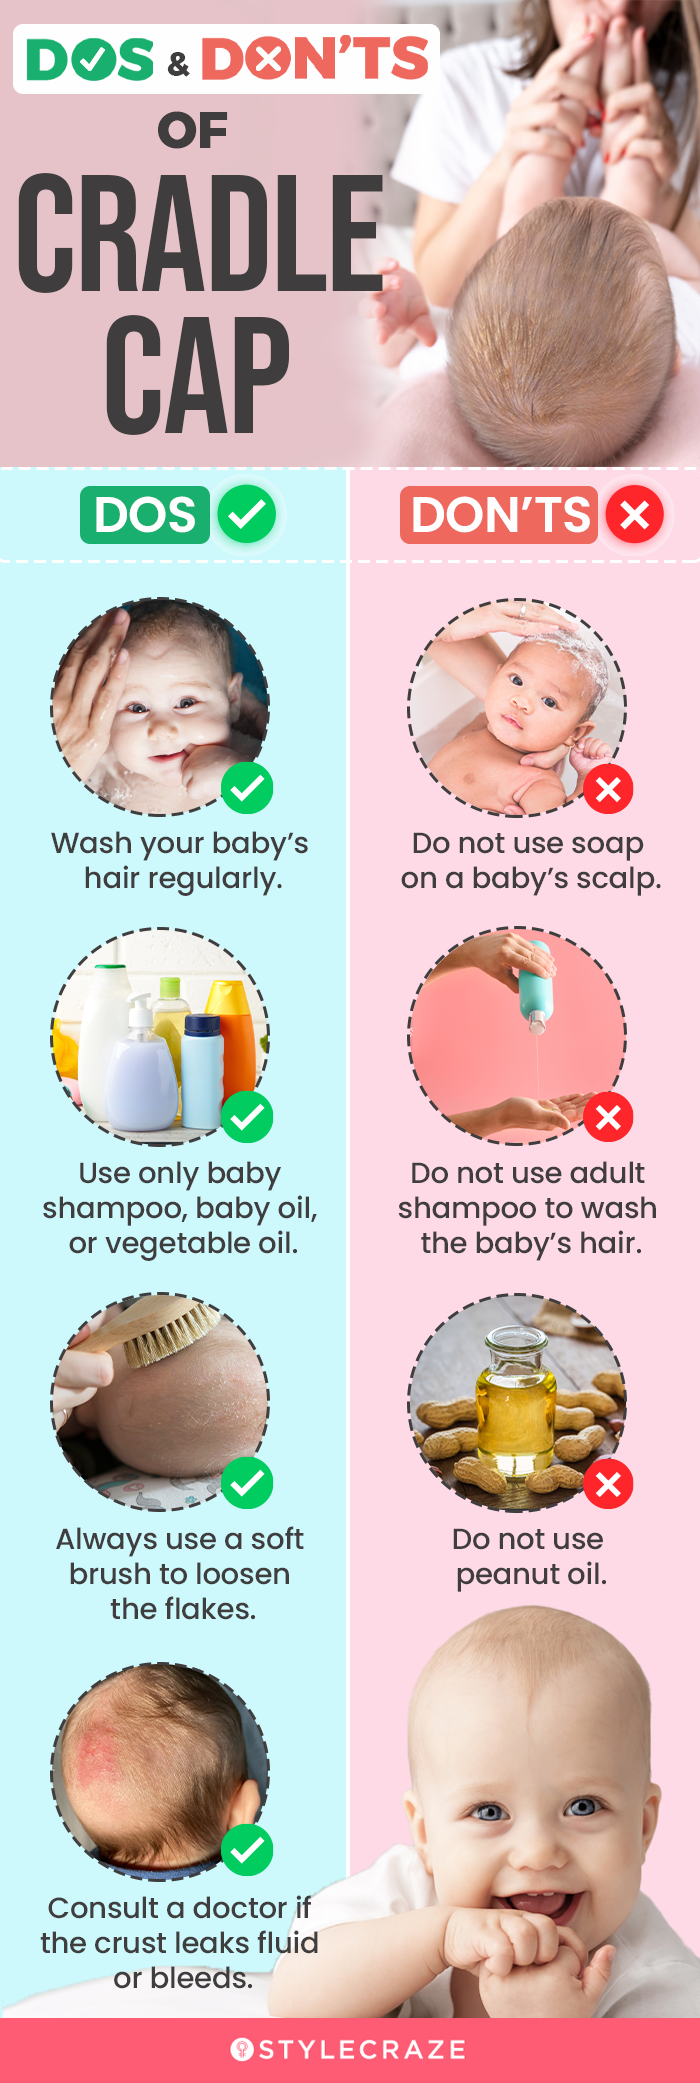 the dos and don’ts of cradle cap (infographic)